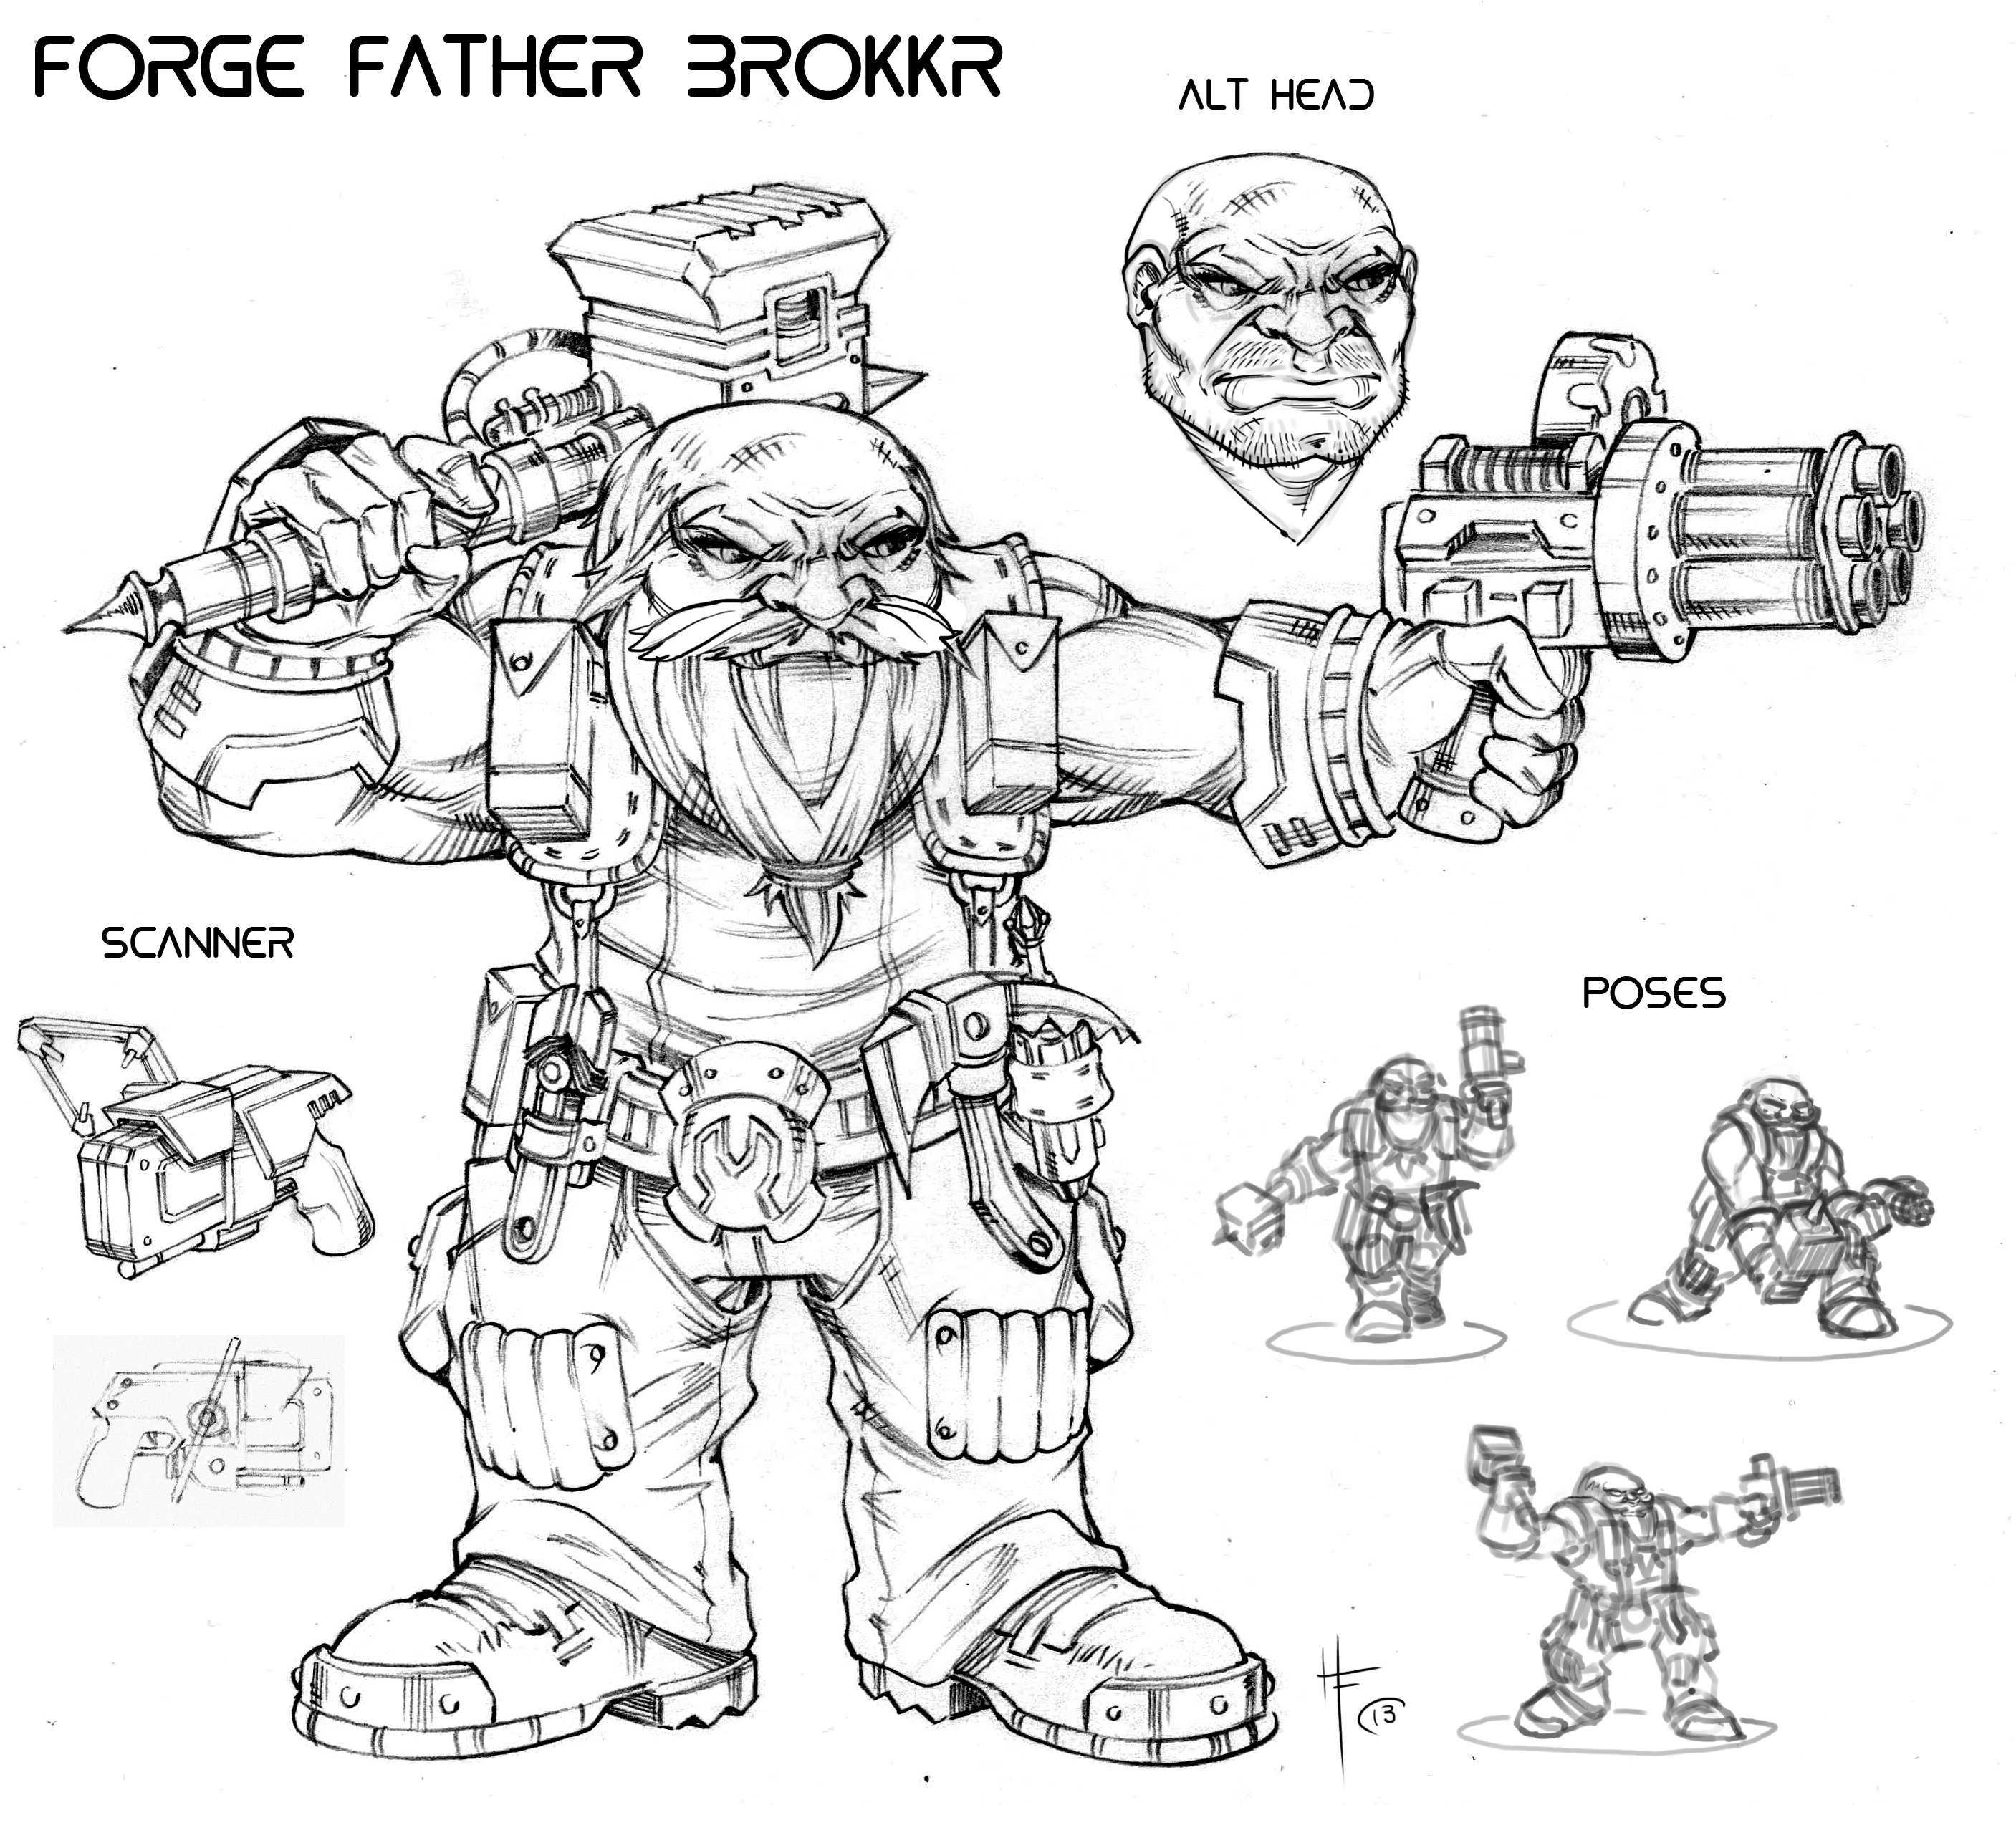 Forge Father Brokkrs Gallery Image 8